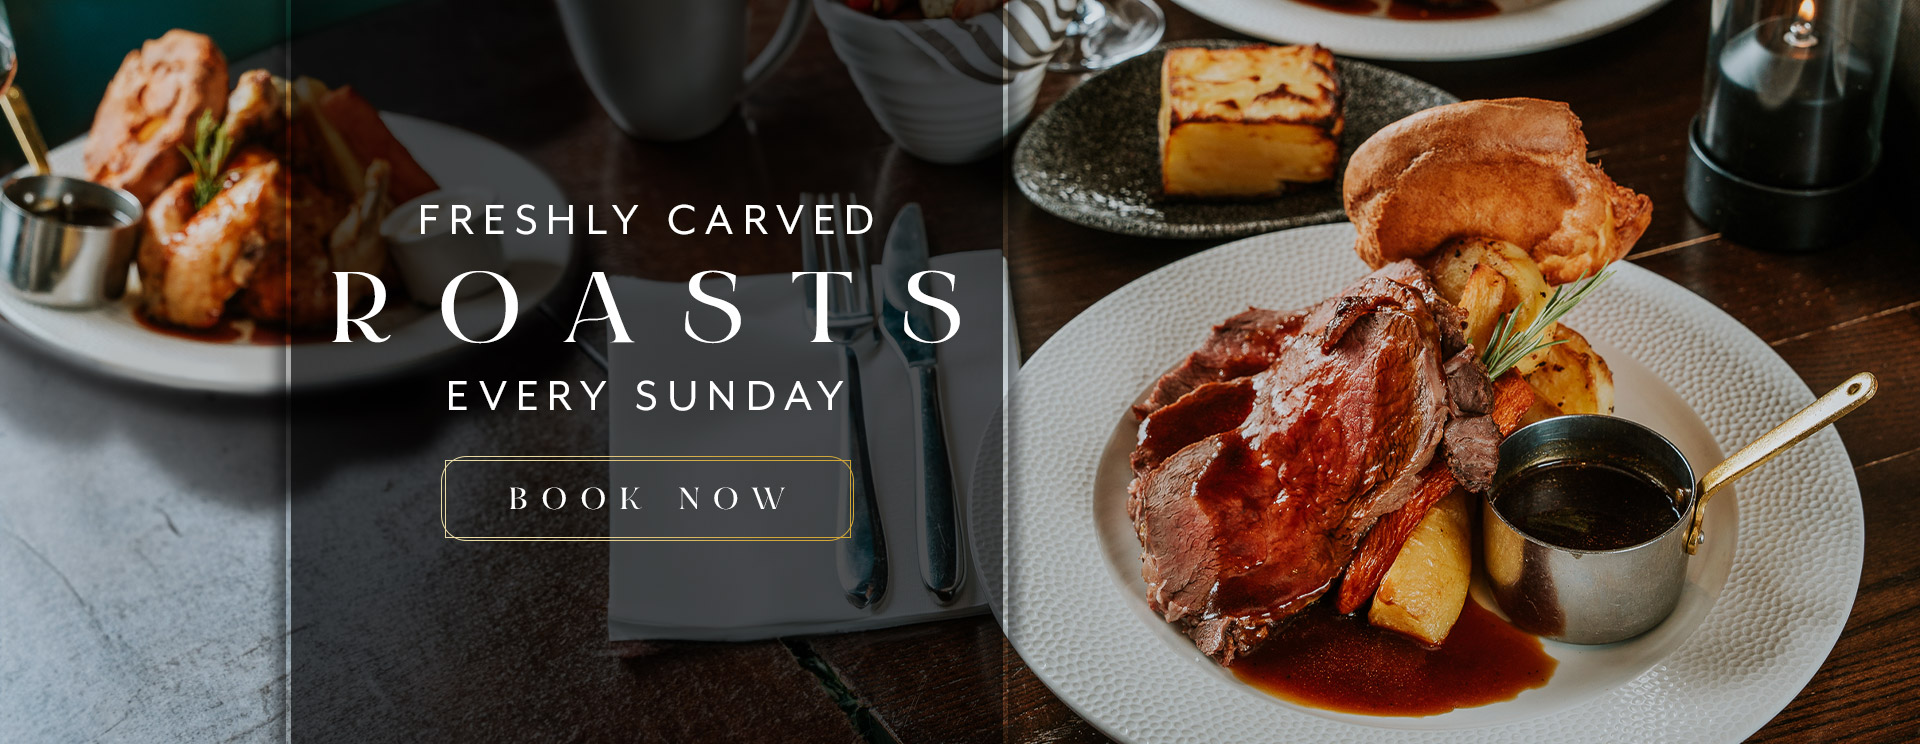 Sunday Lunch at The Whittington Arms